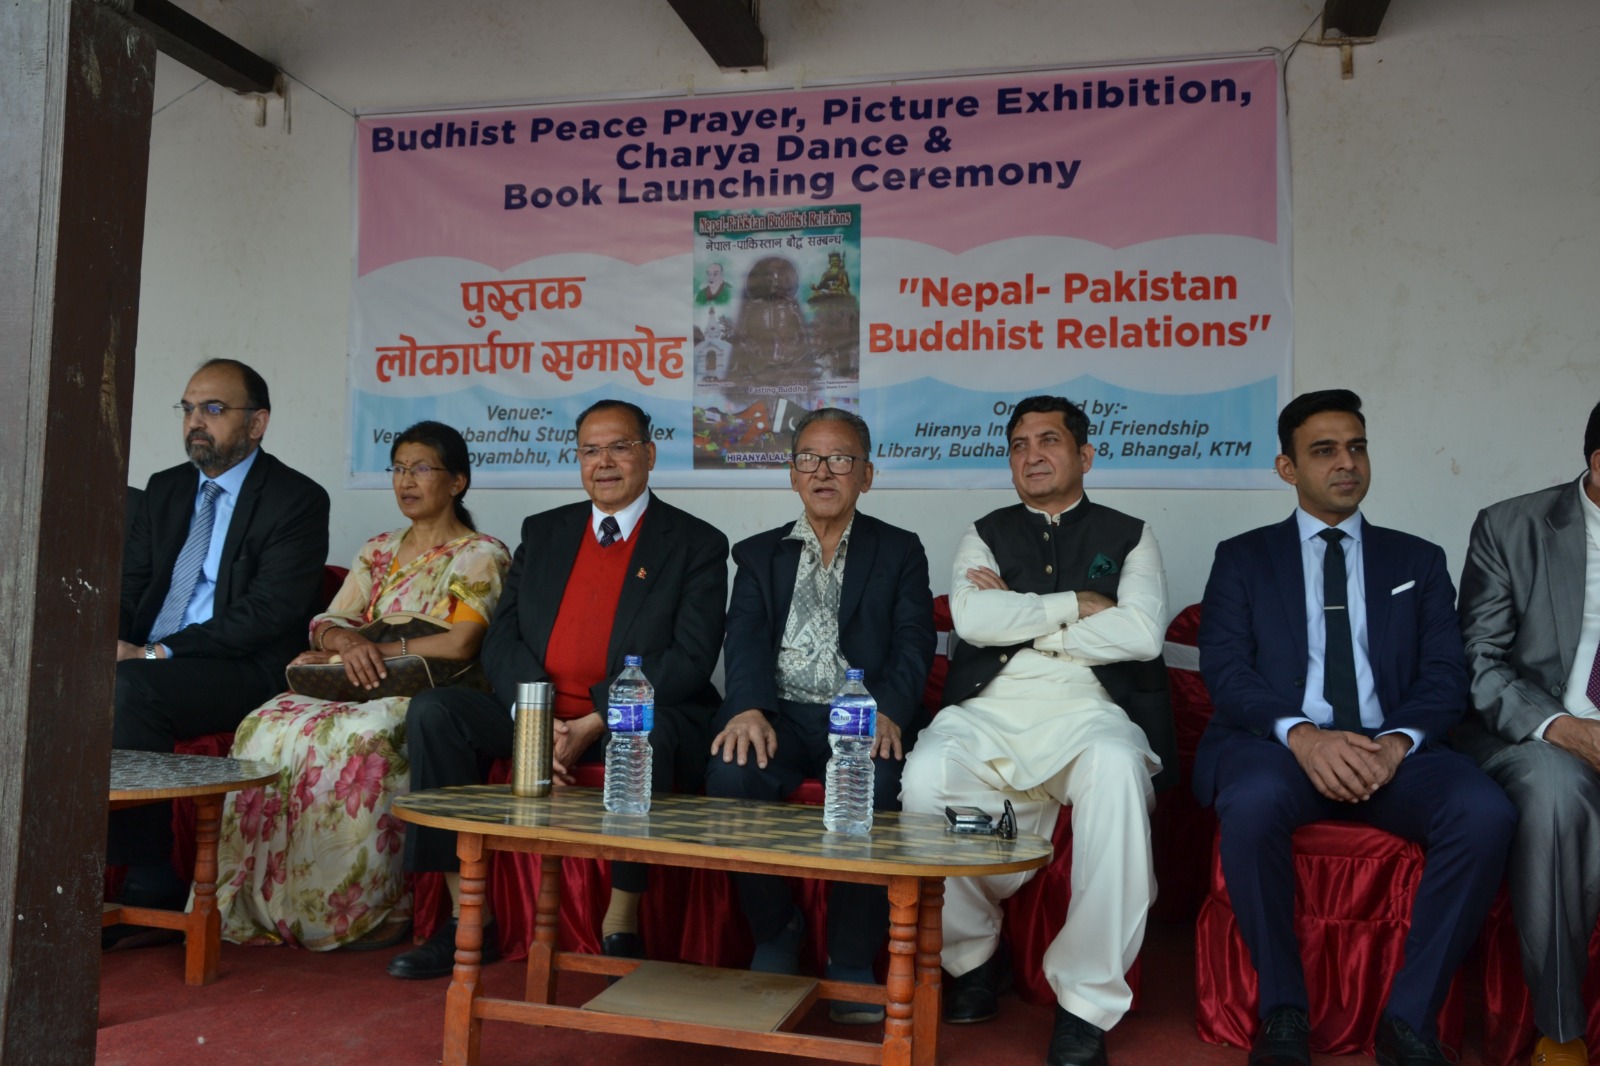 Pak embassy in collaboration with Hiranya Int'l Library launches a book on Nepal-Pakistan Buddhist Relations